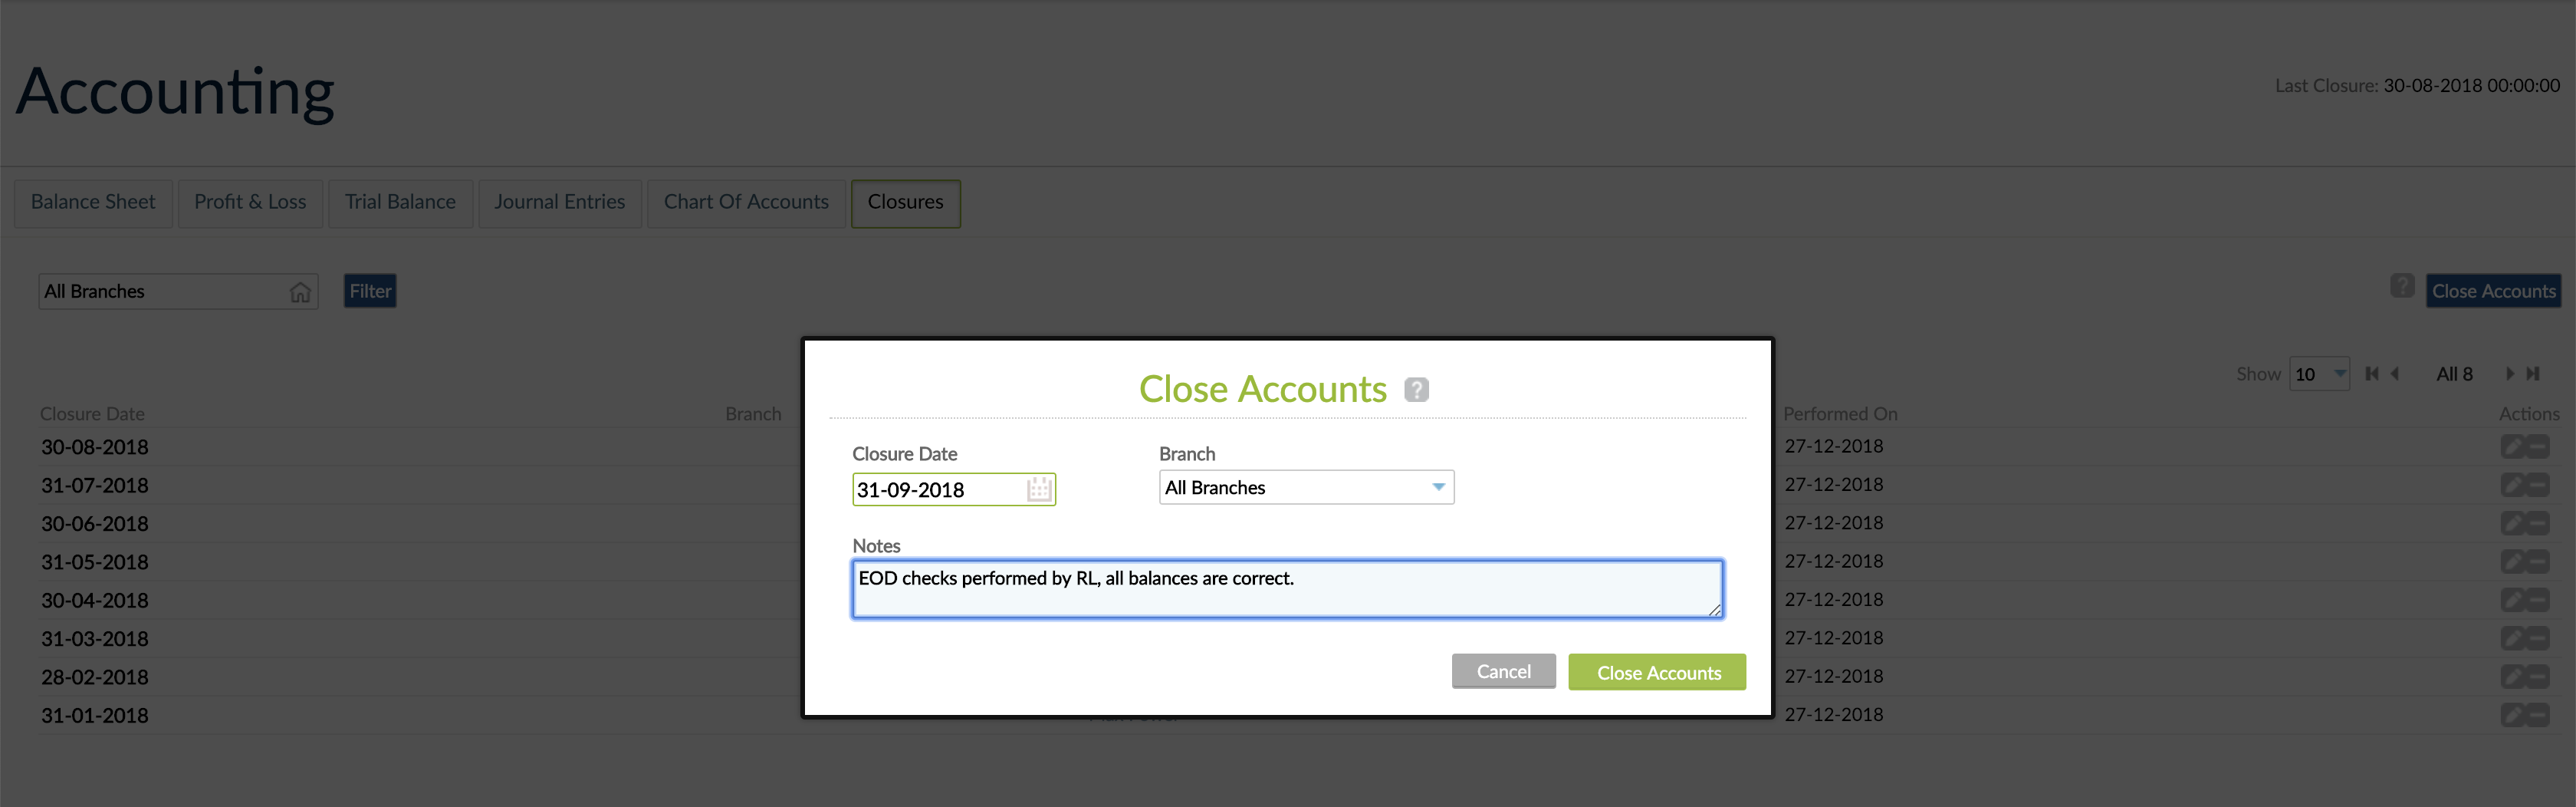 Close Accounts screen with Closure Date, Branch and Notes fields.